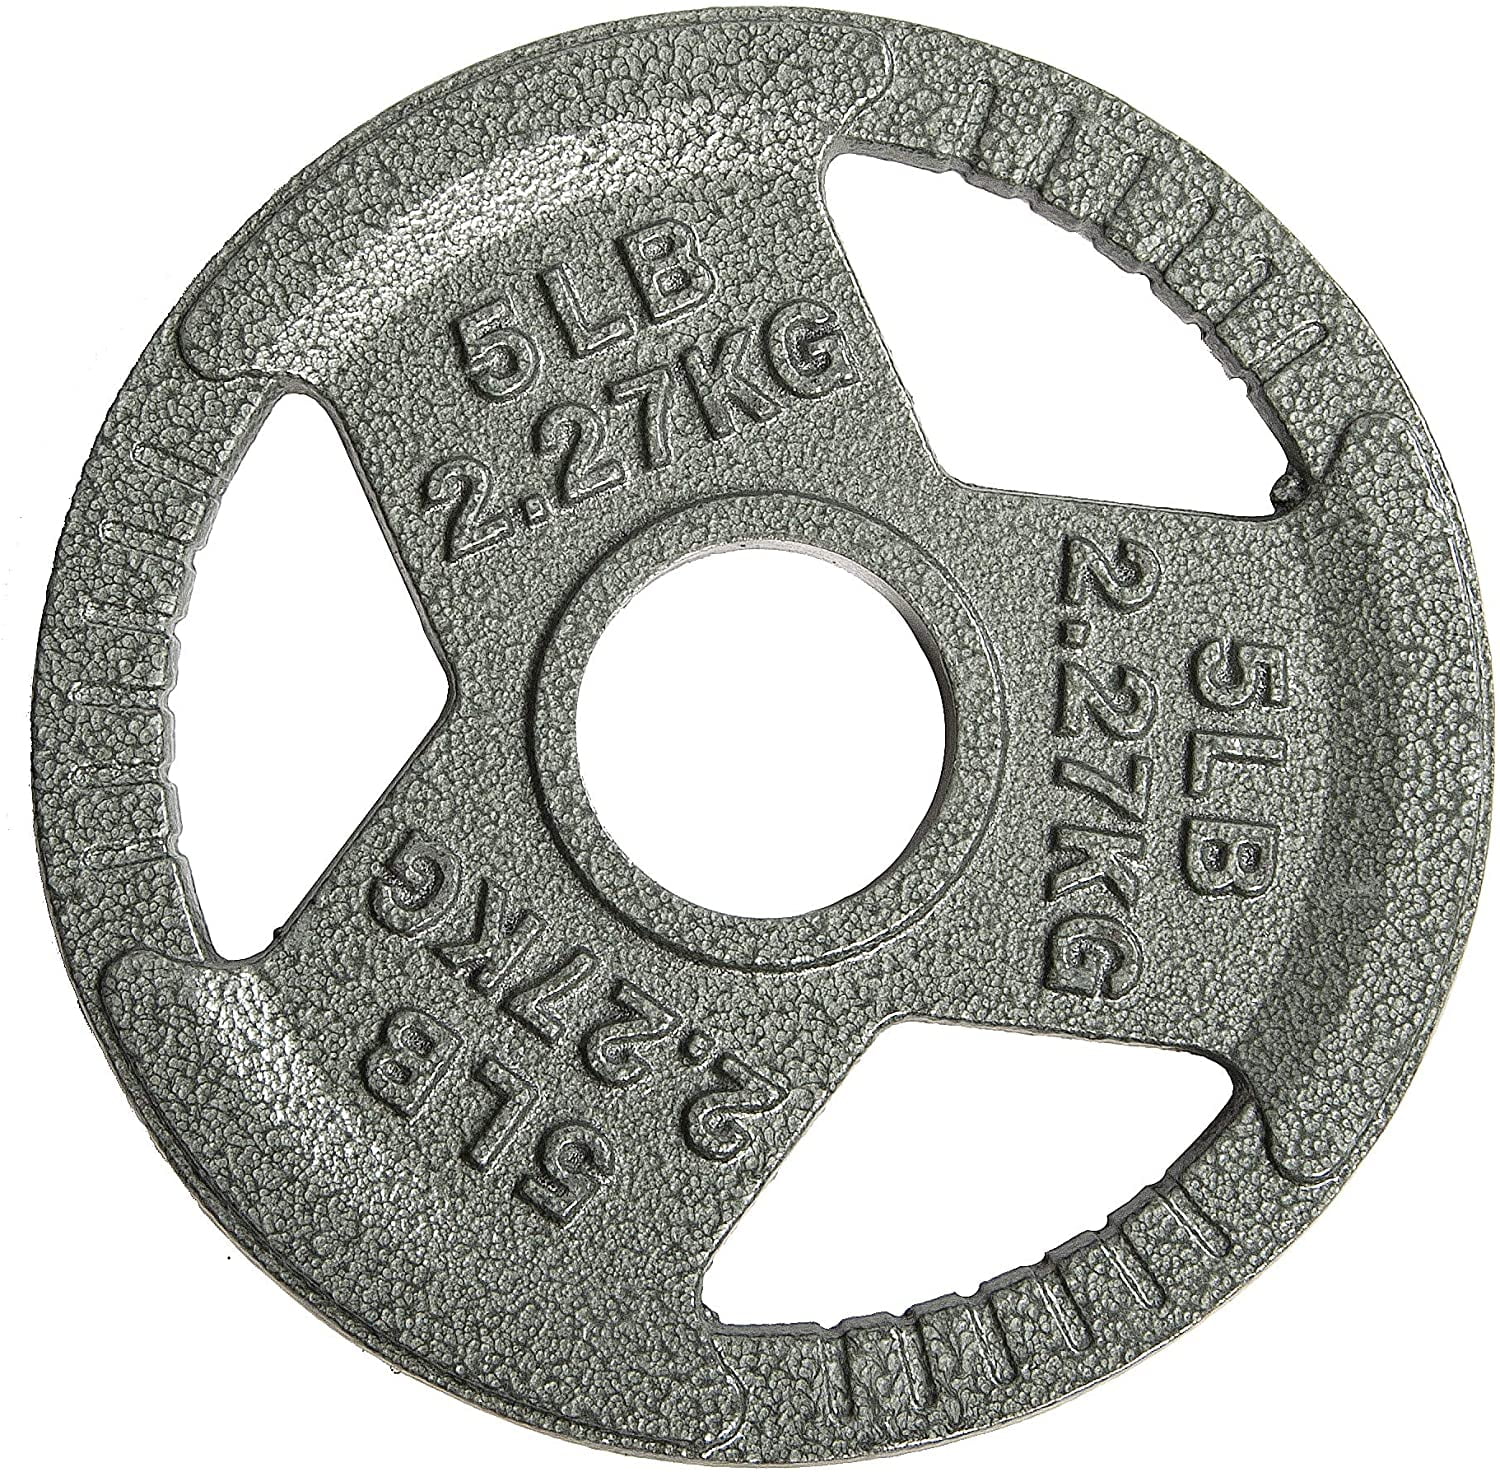 DKN Tri Grip Cast Iron Olympic Weight Plates 